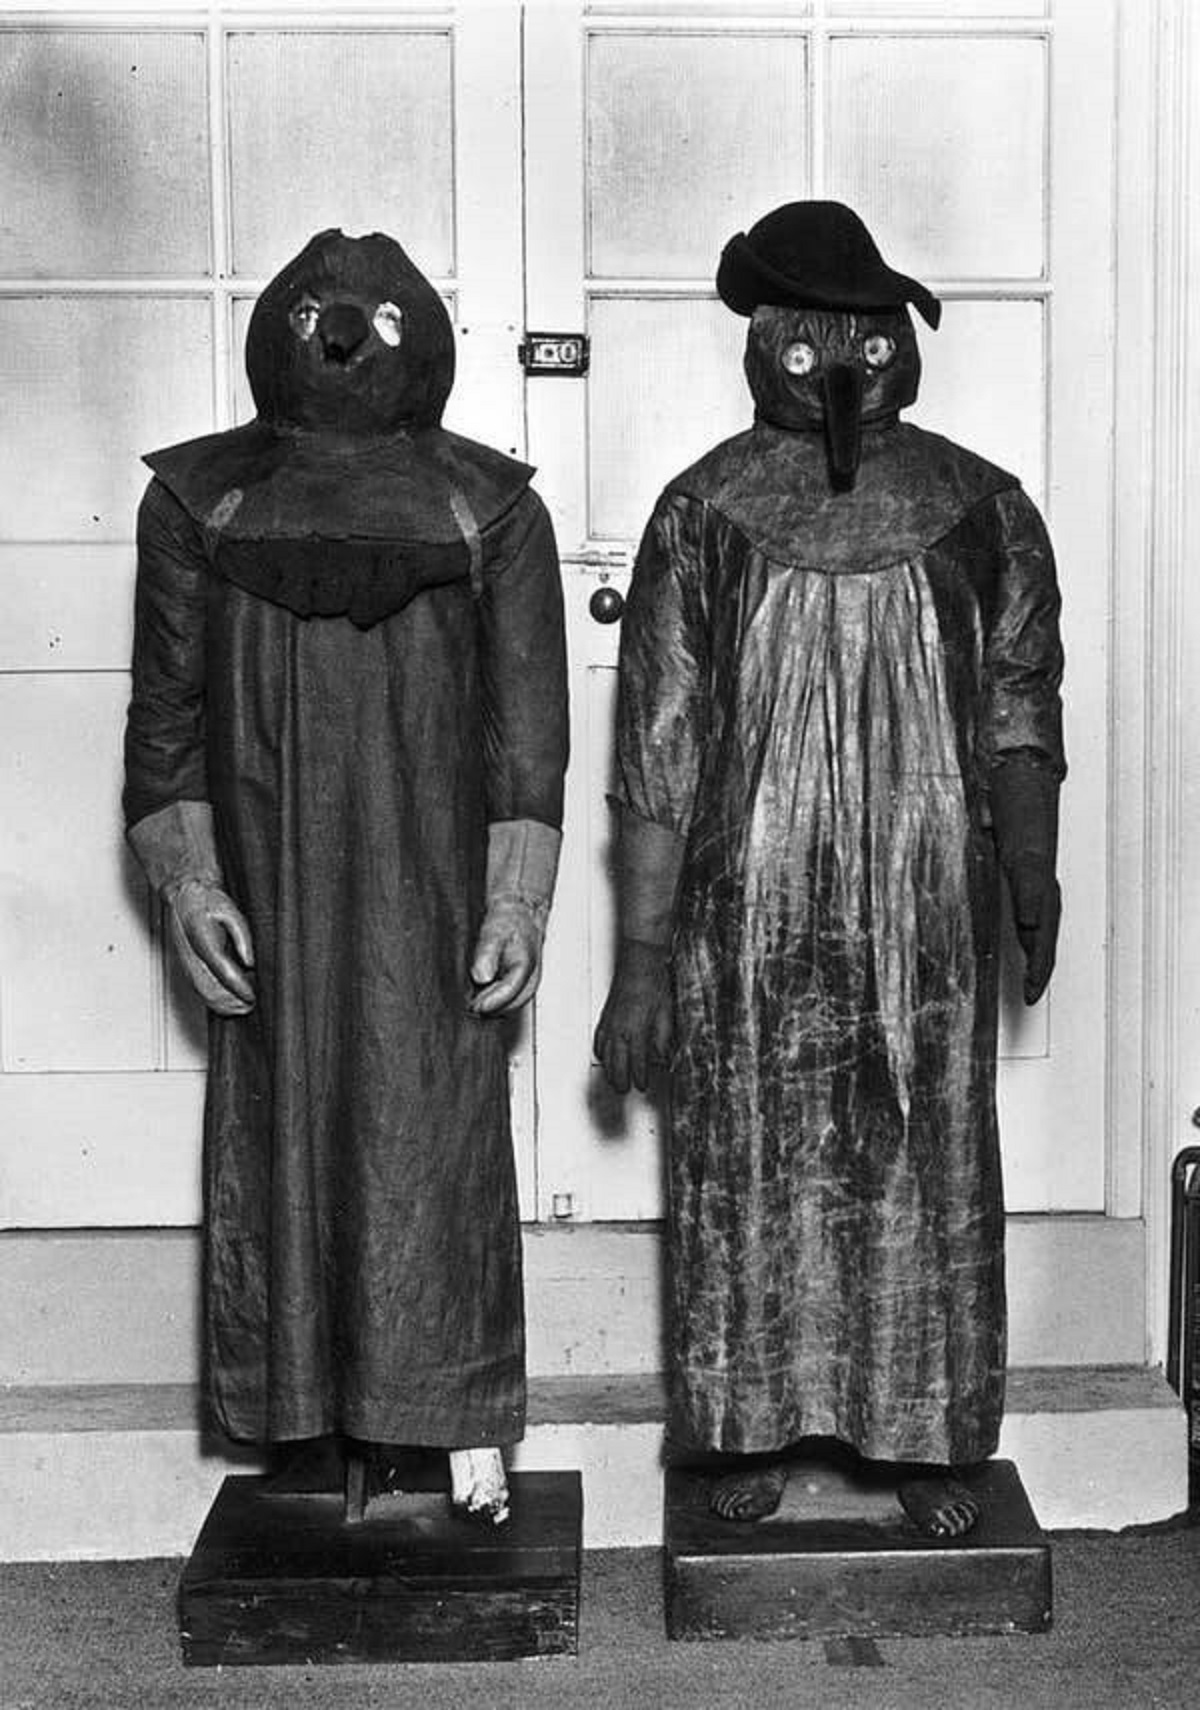 These are the real-life outfits doctors would wear to treat plague patients in the 1600s: